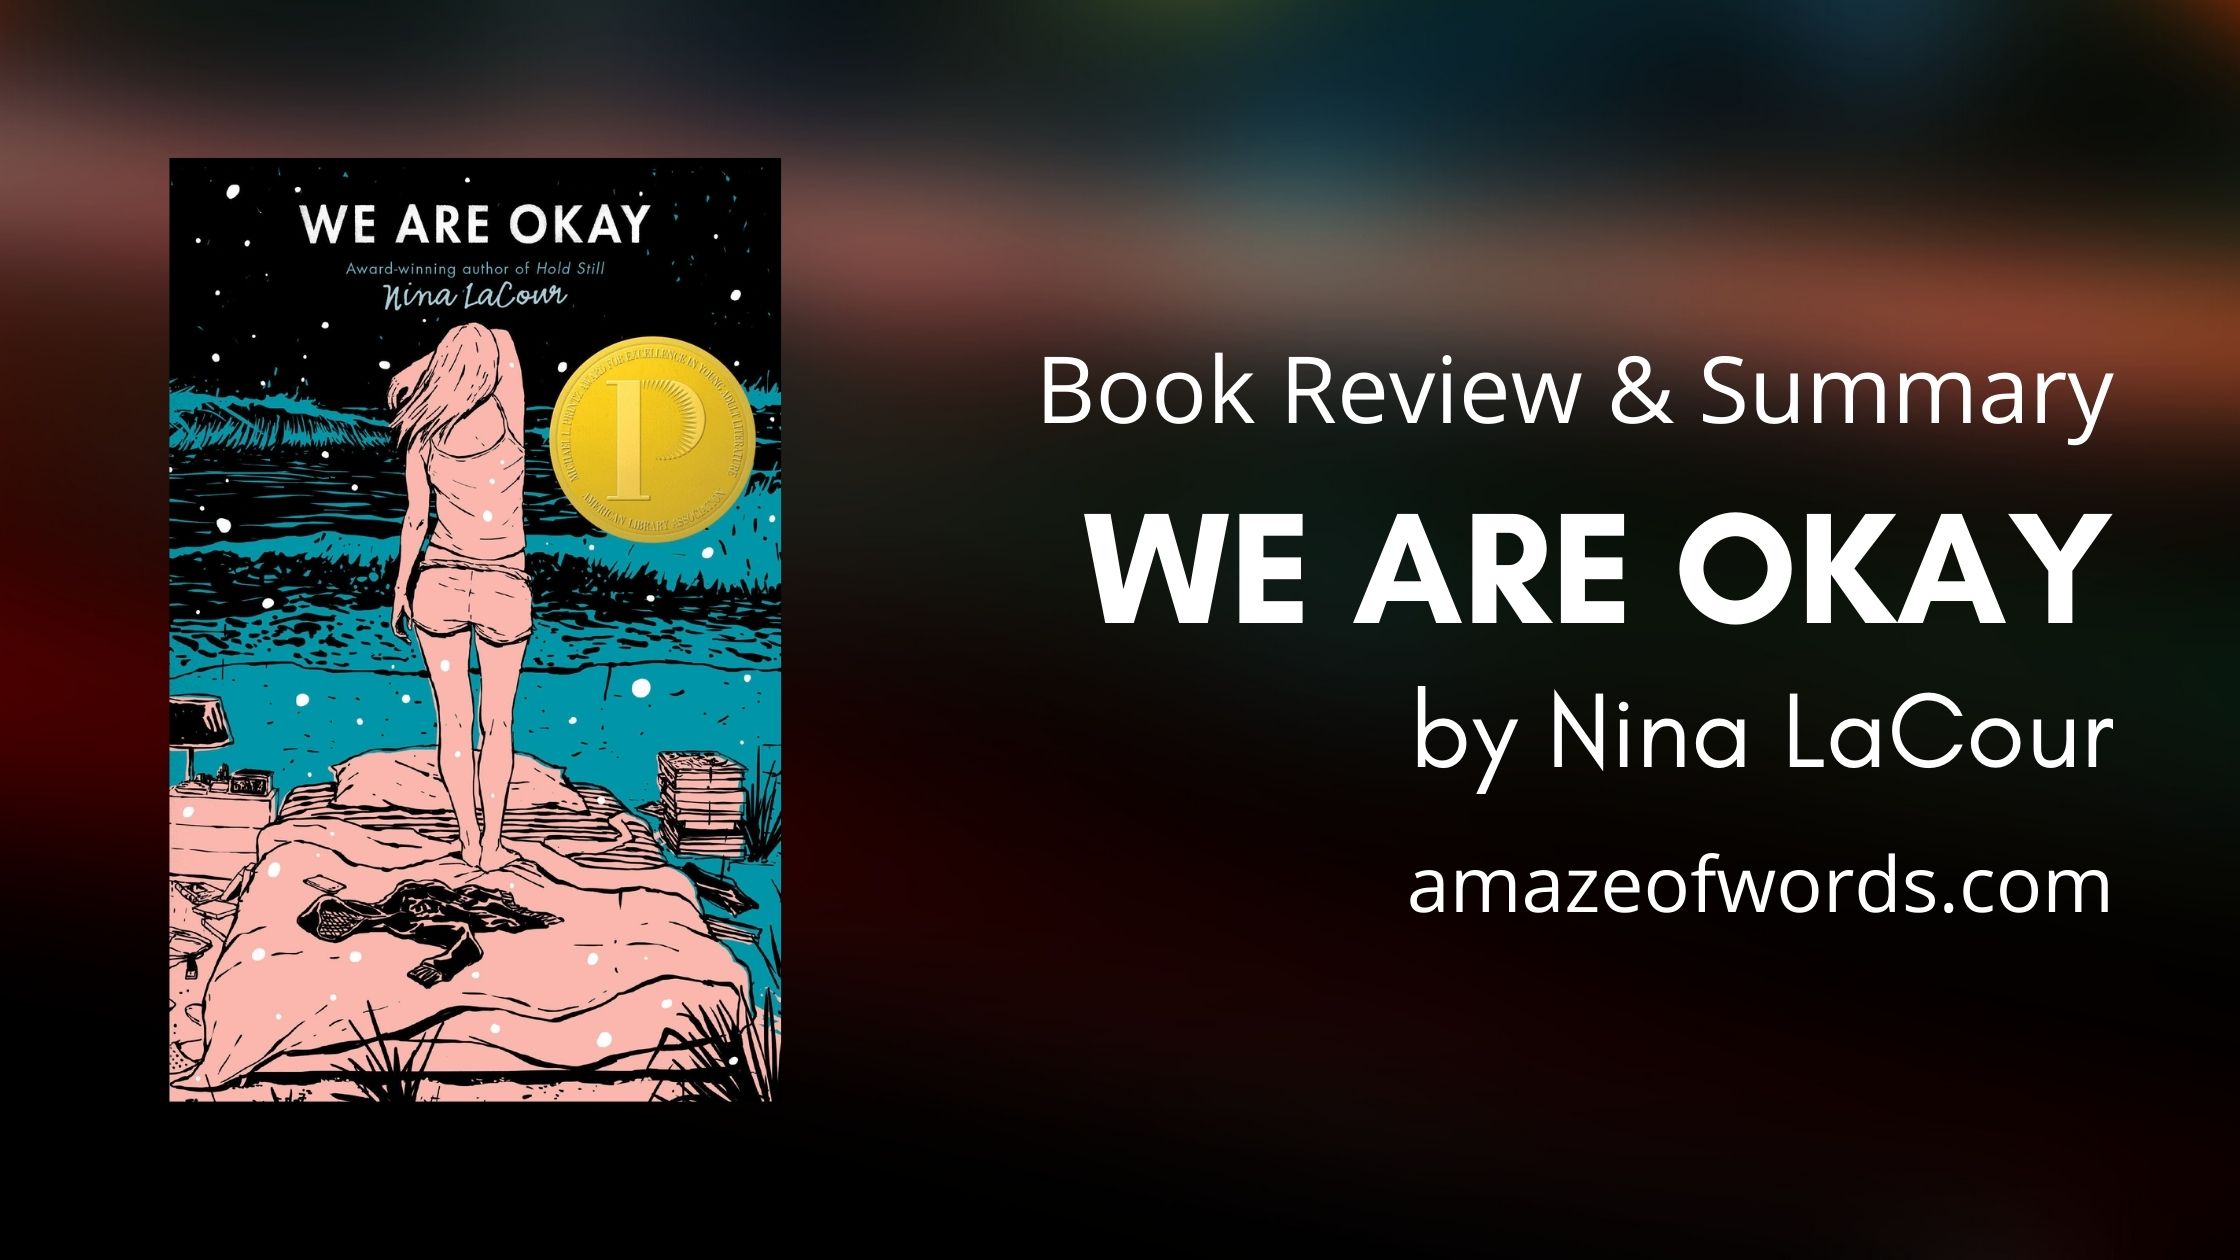 We Are Okay by Nina LaCour — Book Review & Summary